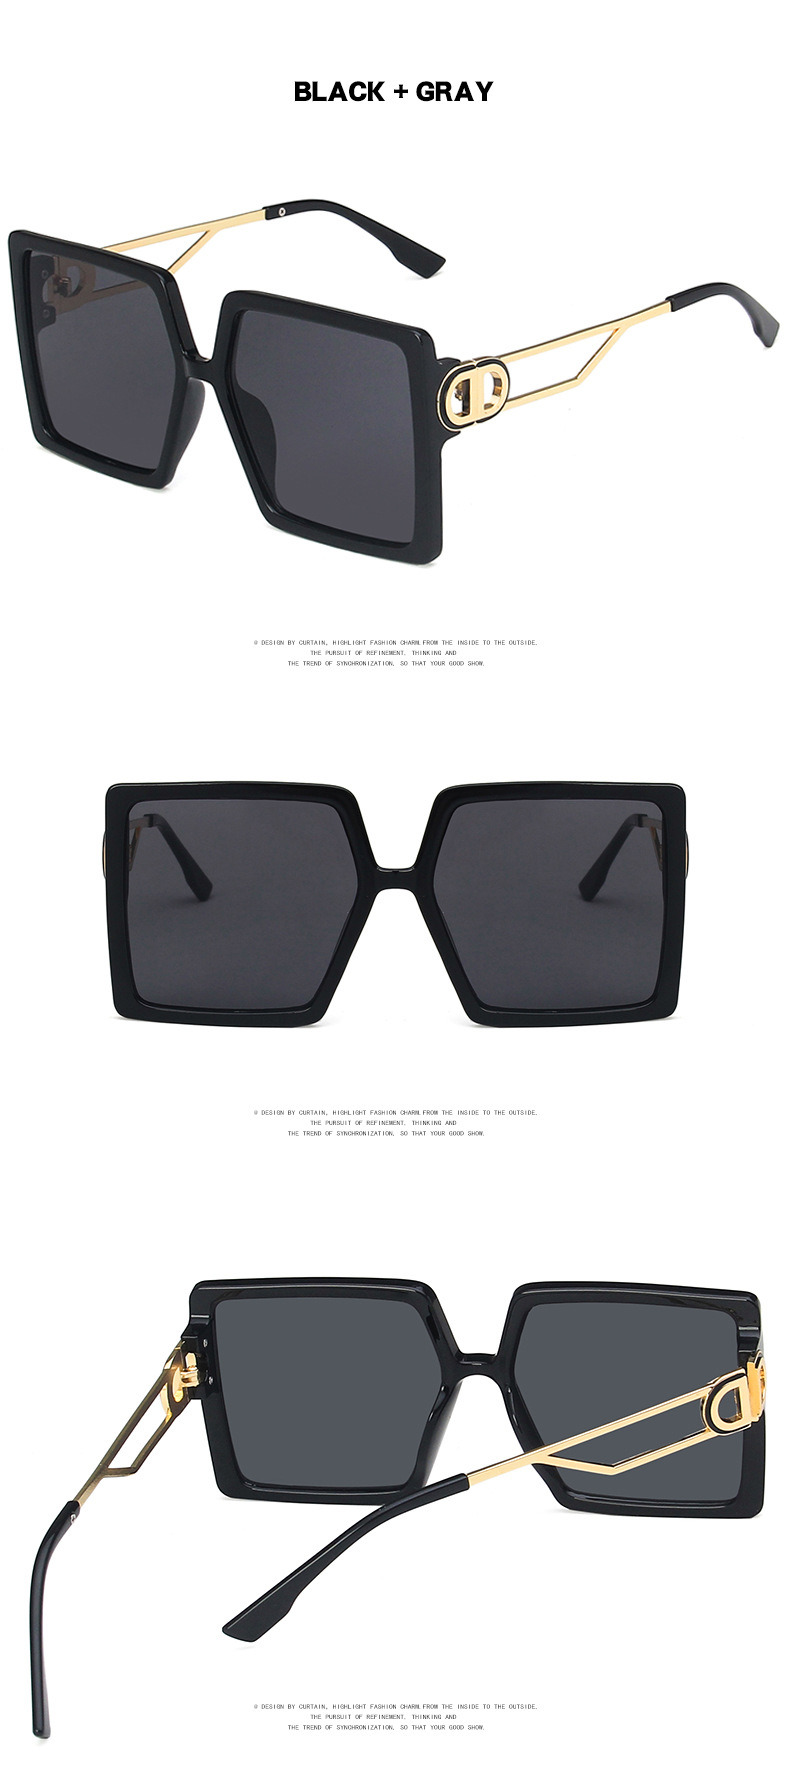 New Arrivals Sun Protection Fall Metal Square Sunglasses for Women Men